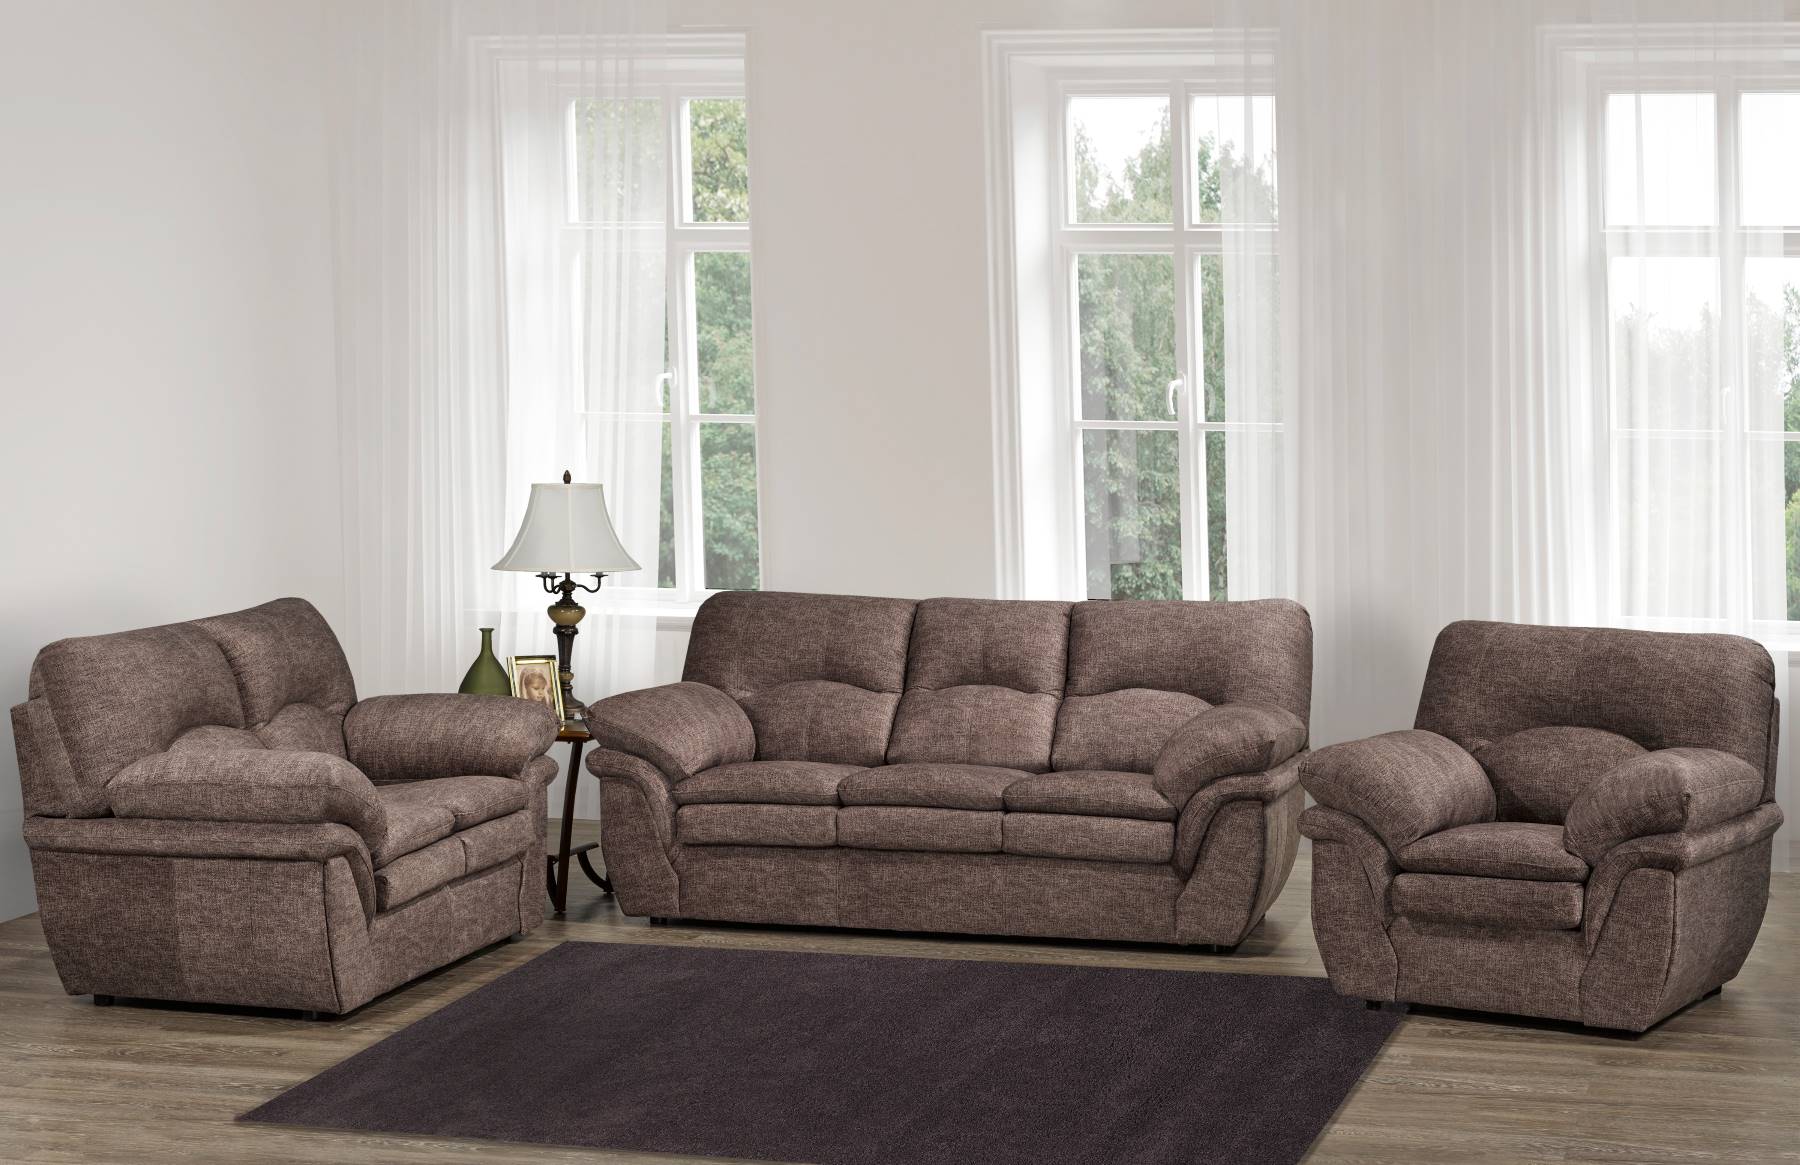 Canadian Made Lovey's Mocha Sofa Collection 7557